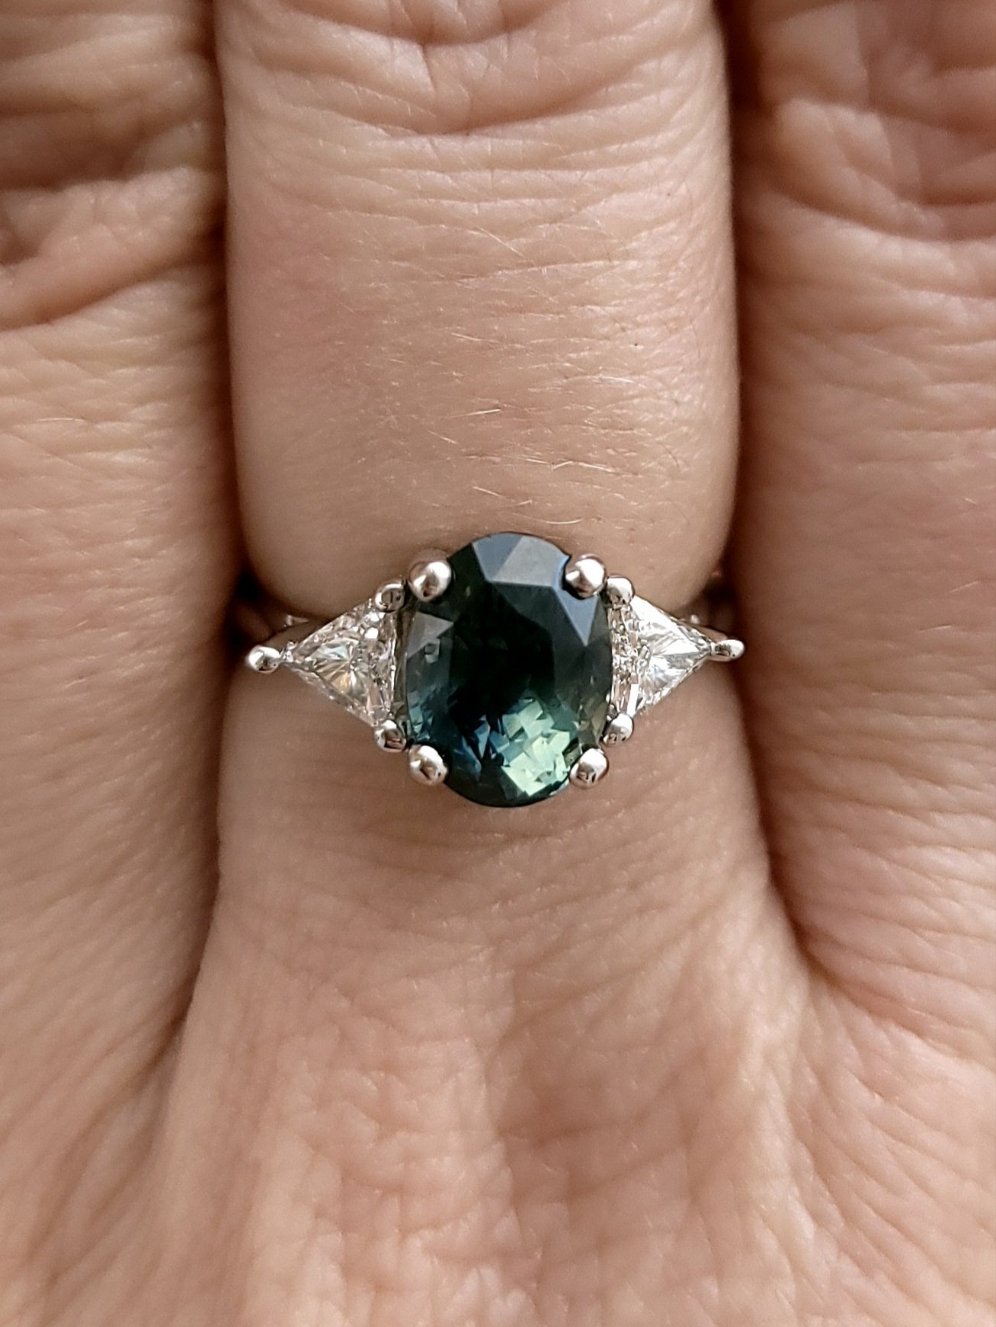 Ring - Madagascar Sapphire 3.26 CT Color Change Oval Cut Teal to Forest Green set in 14K White Gold and Triangle Diamond Ring